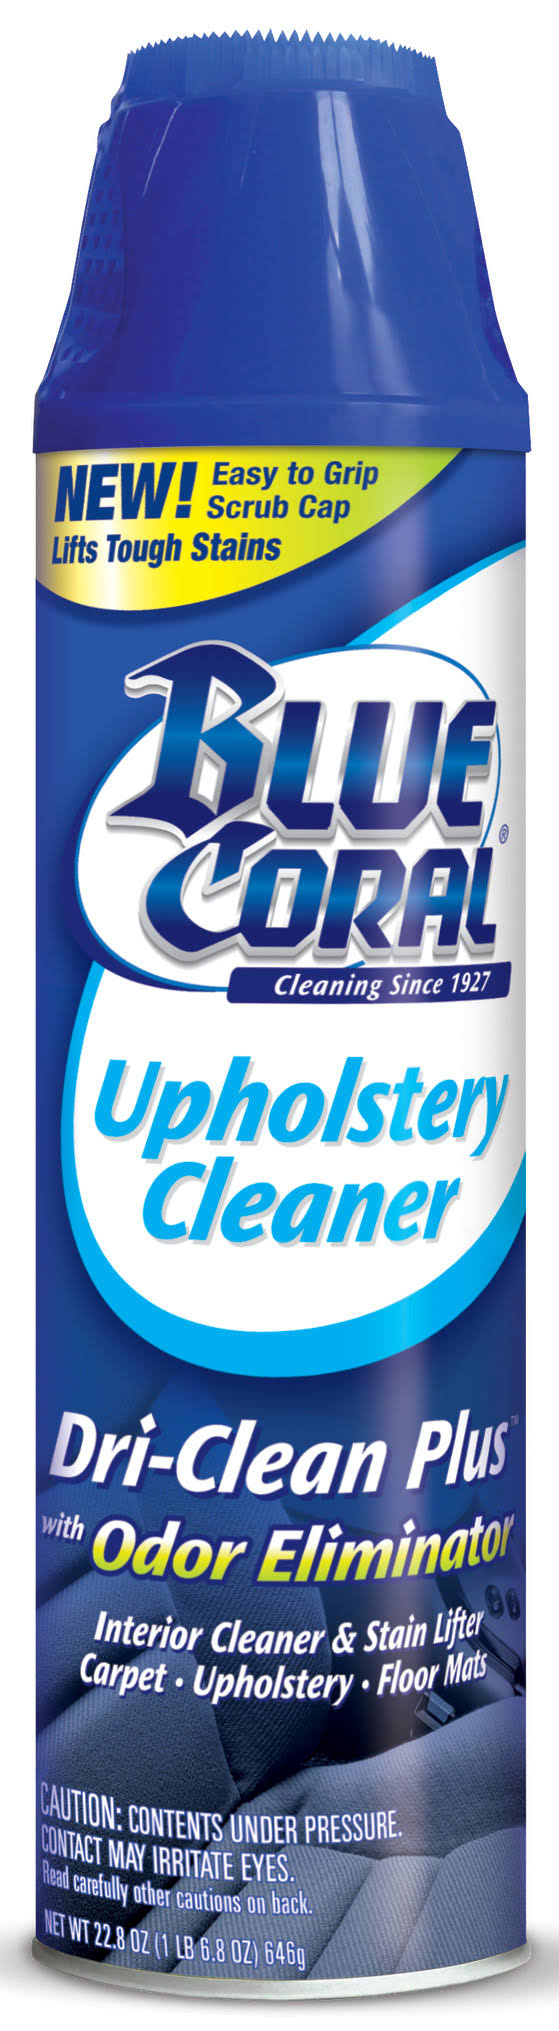 Blue Coral Upholstery Cleaner - 22.8oz